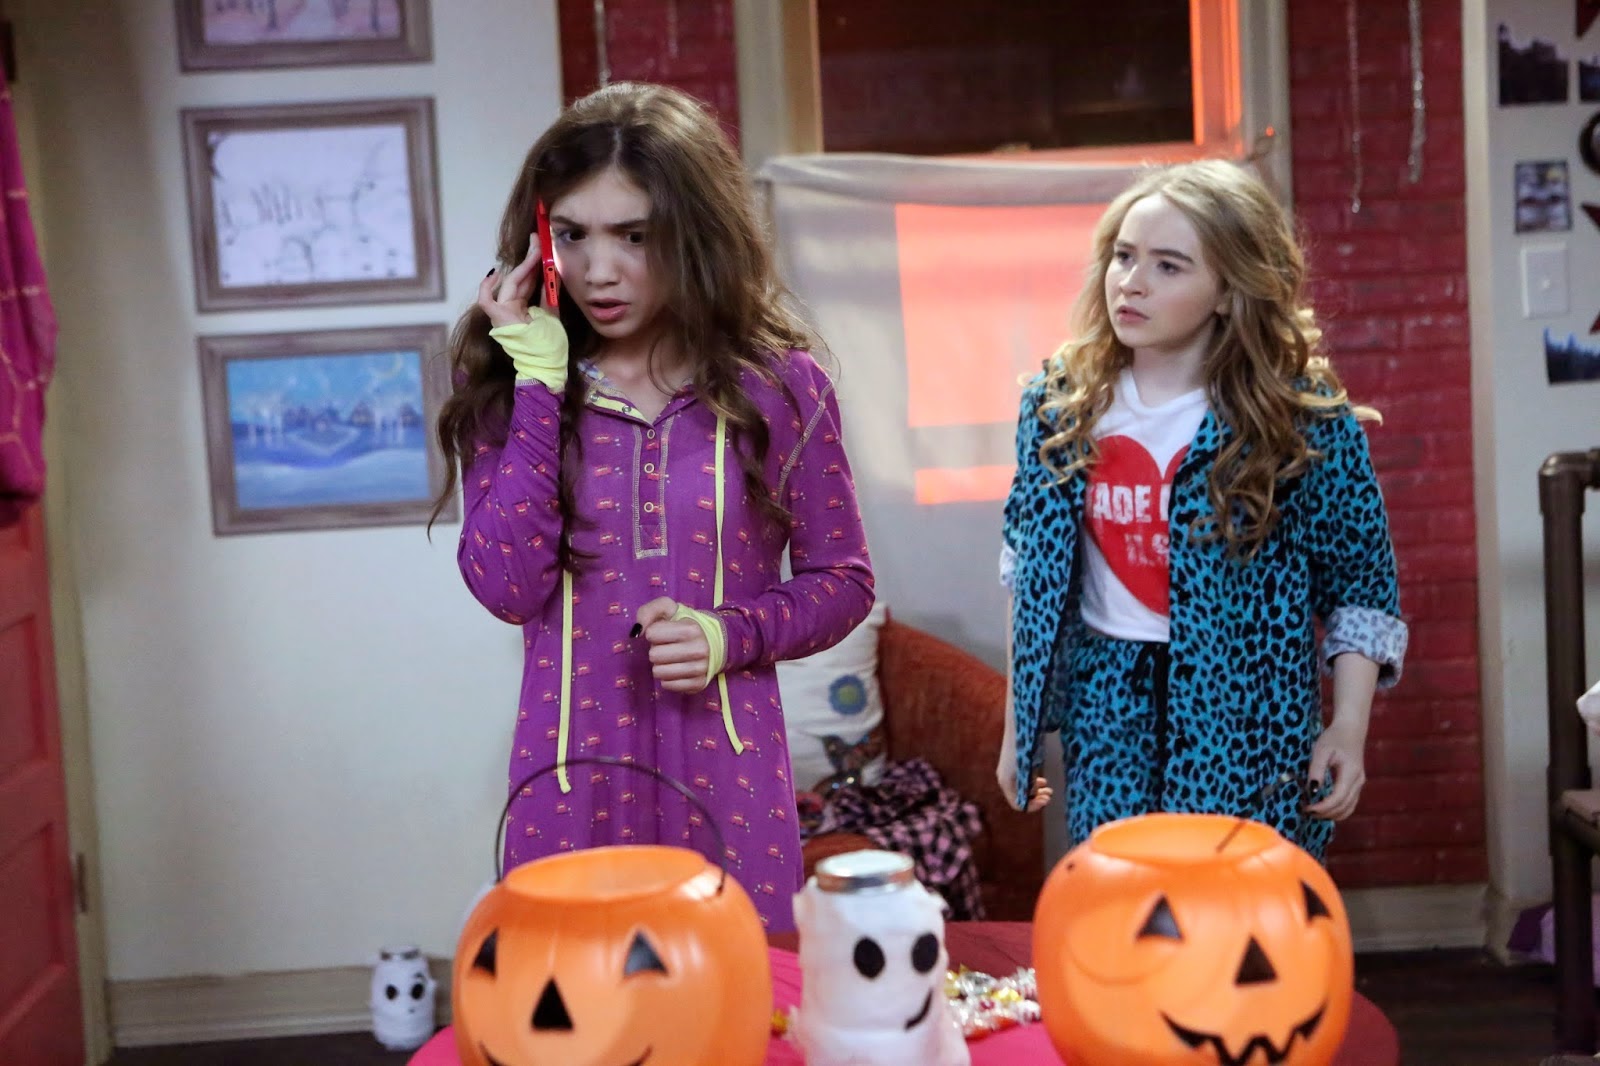 Girl Meets World - Episode 1.11 - Review: "Happy Halloctober"